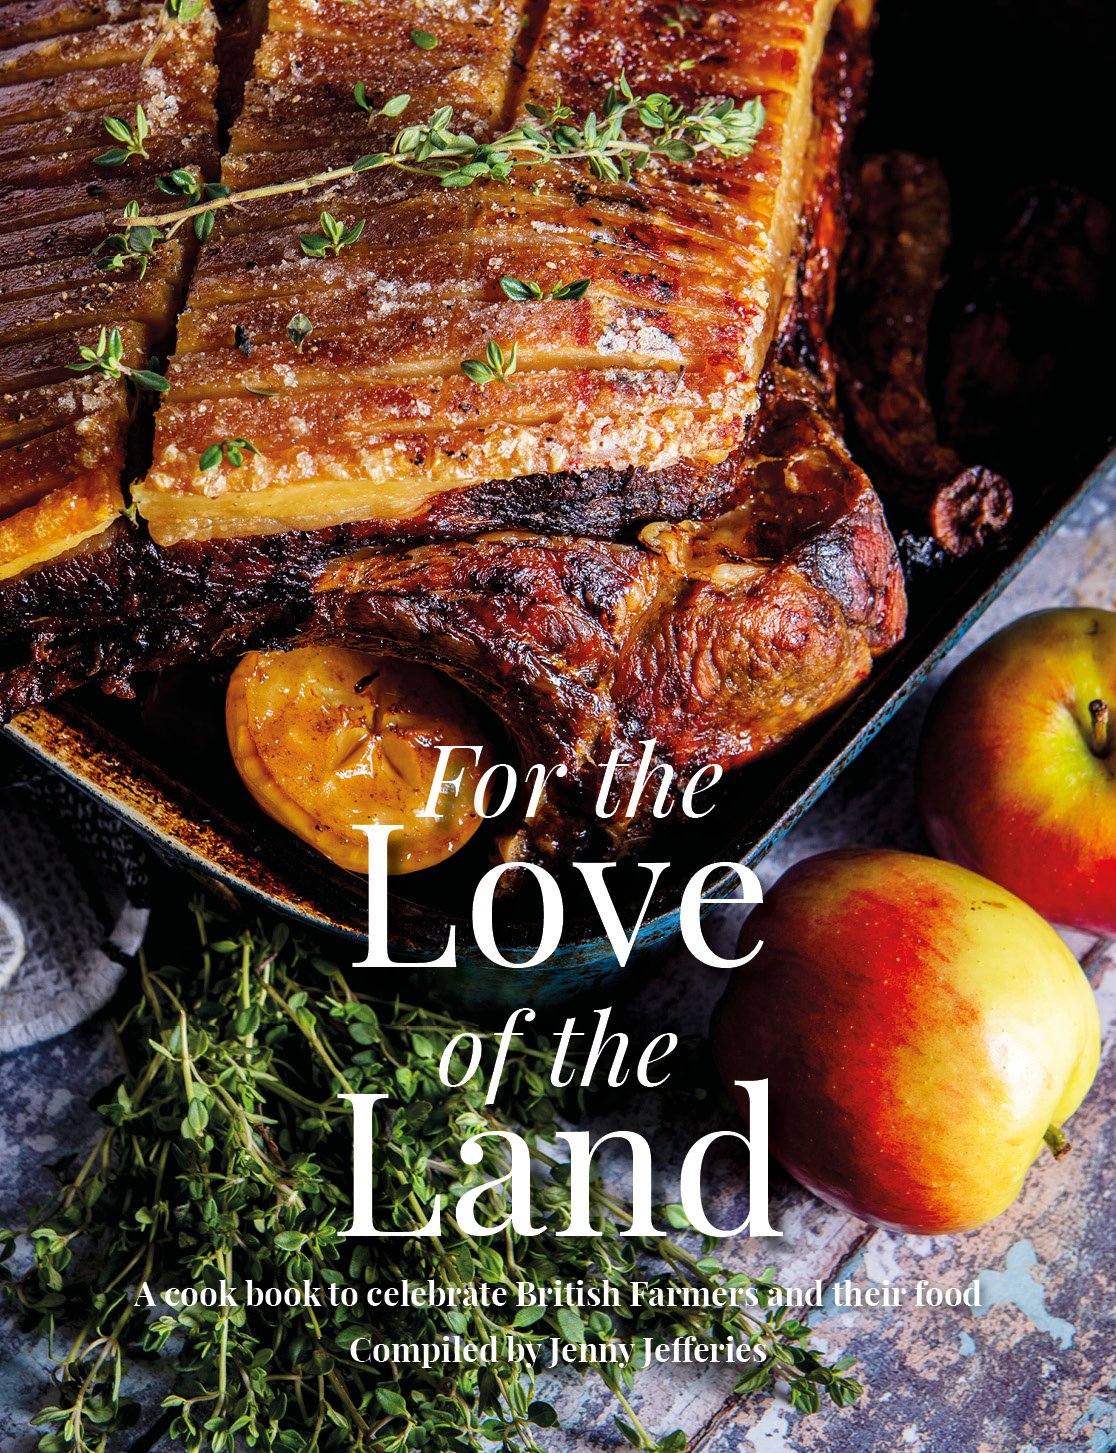 For the Love of the Land book jacket